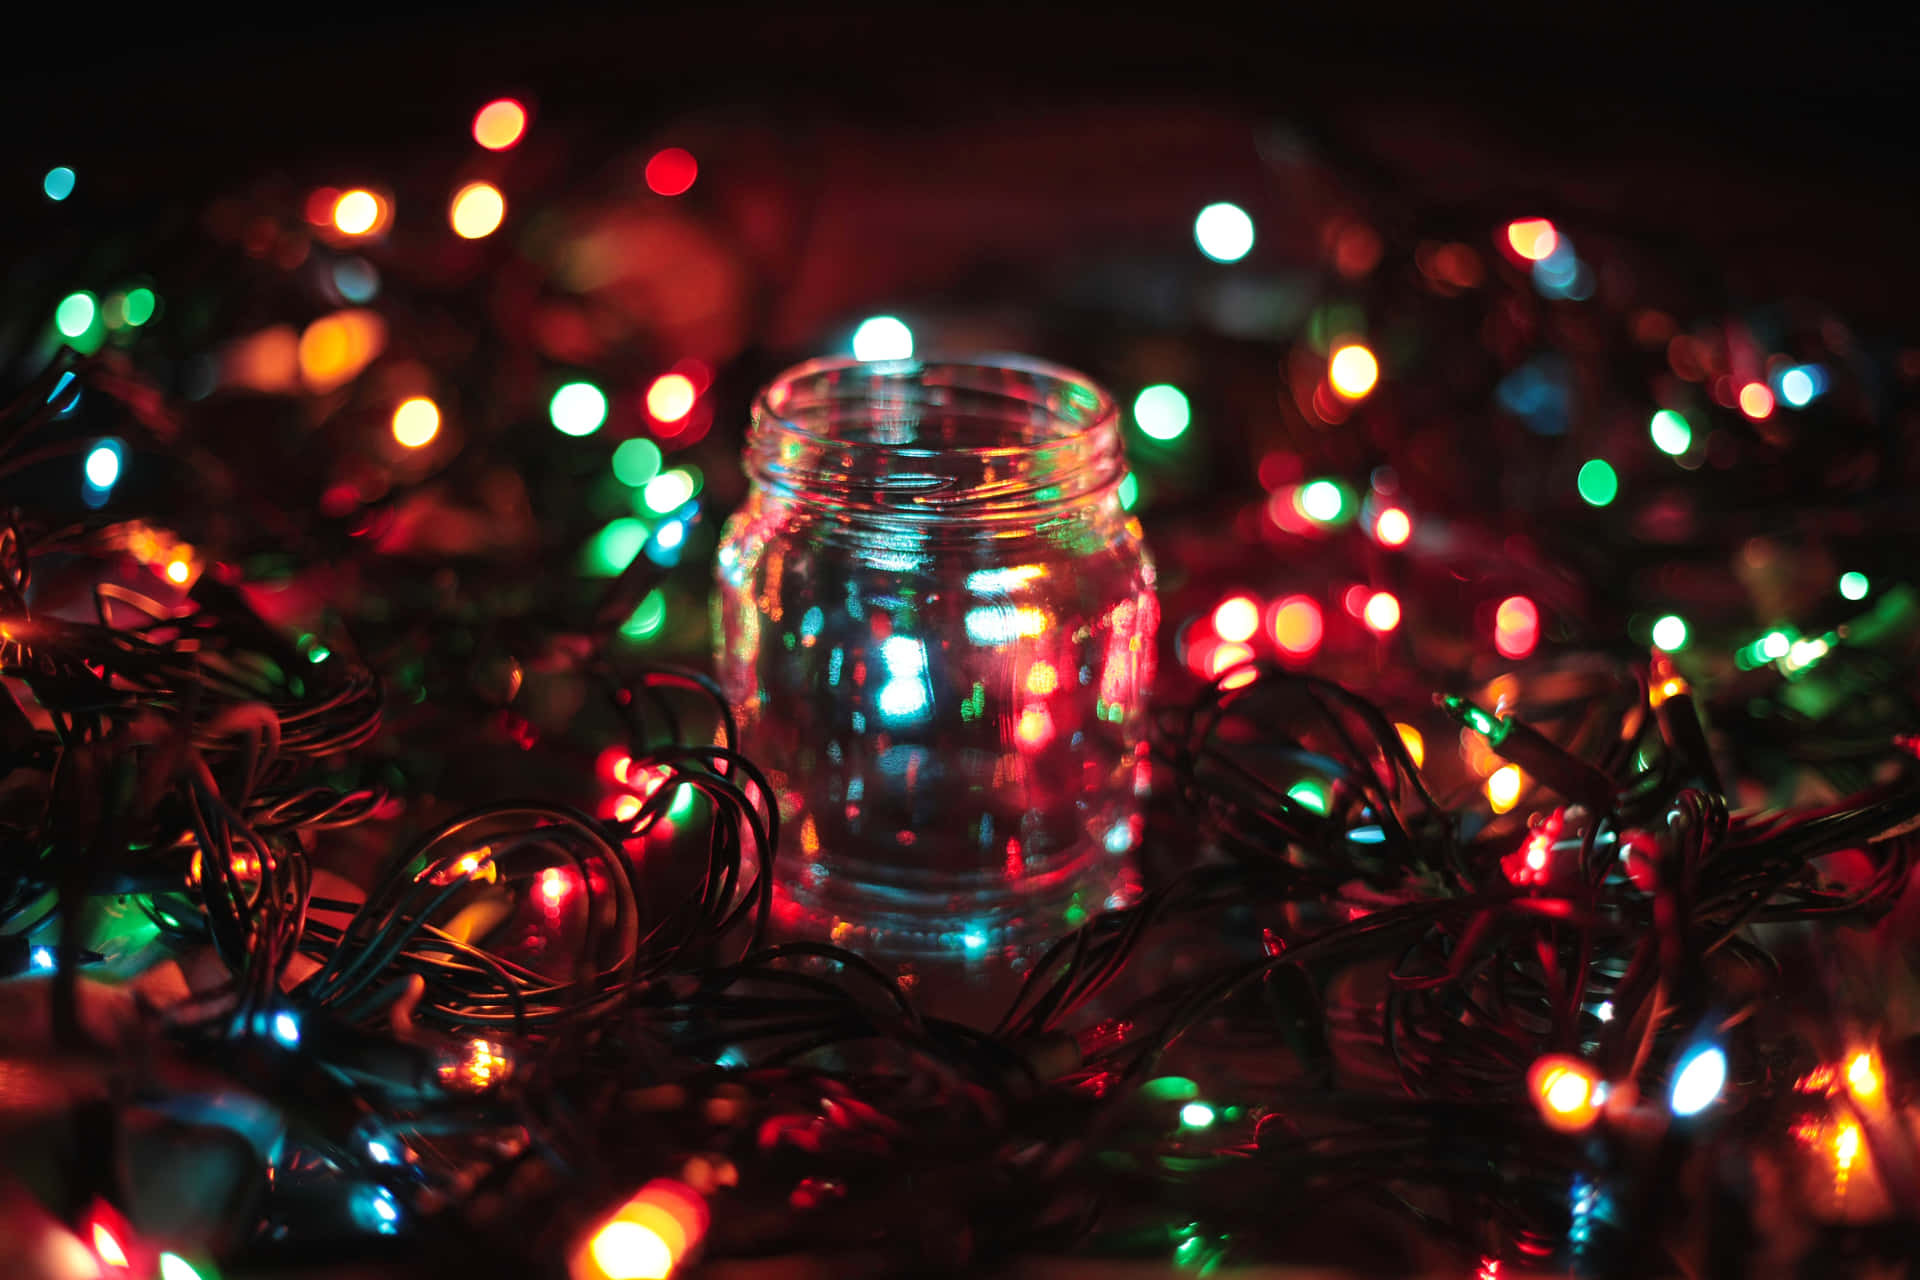 Get into the holiday spirit with these festive Christmas Lights